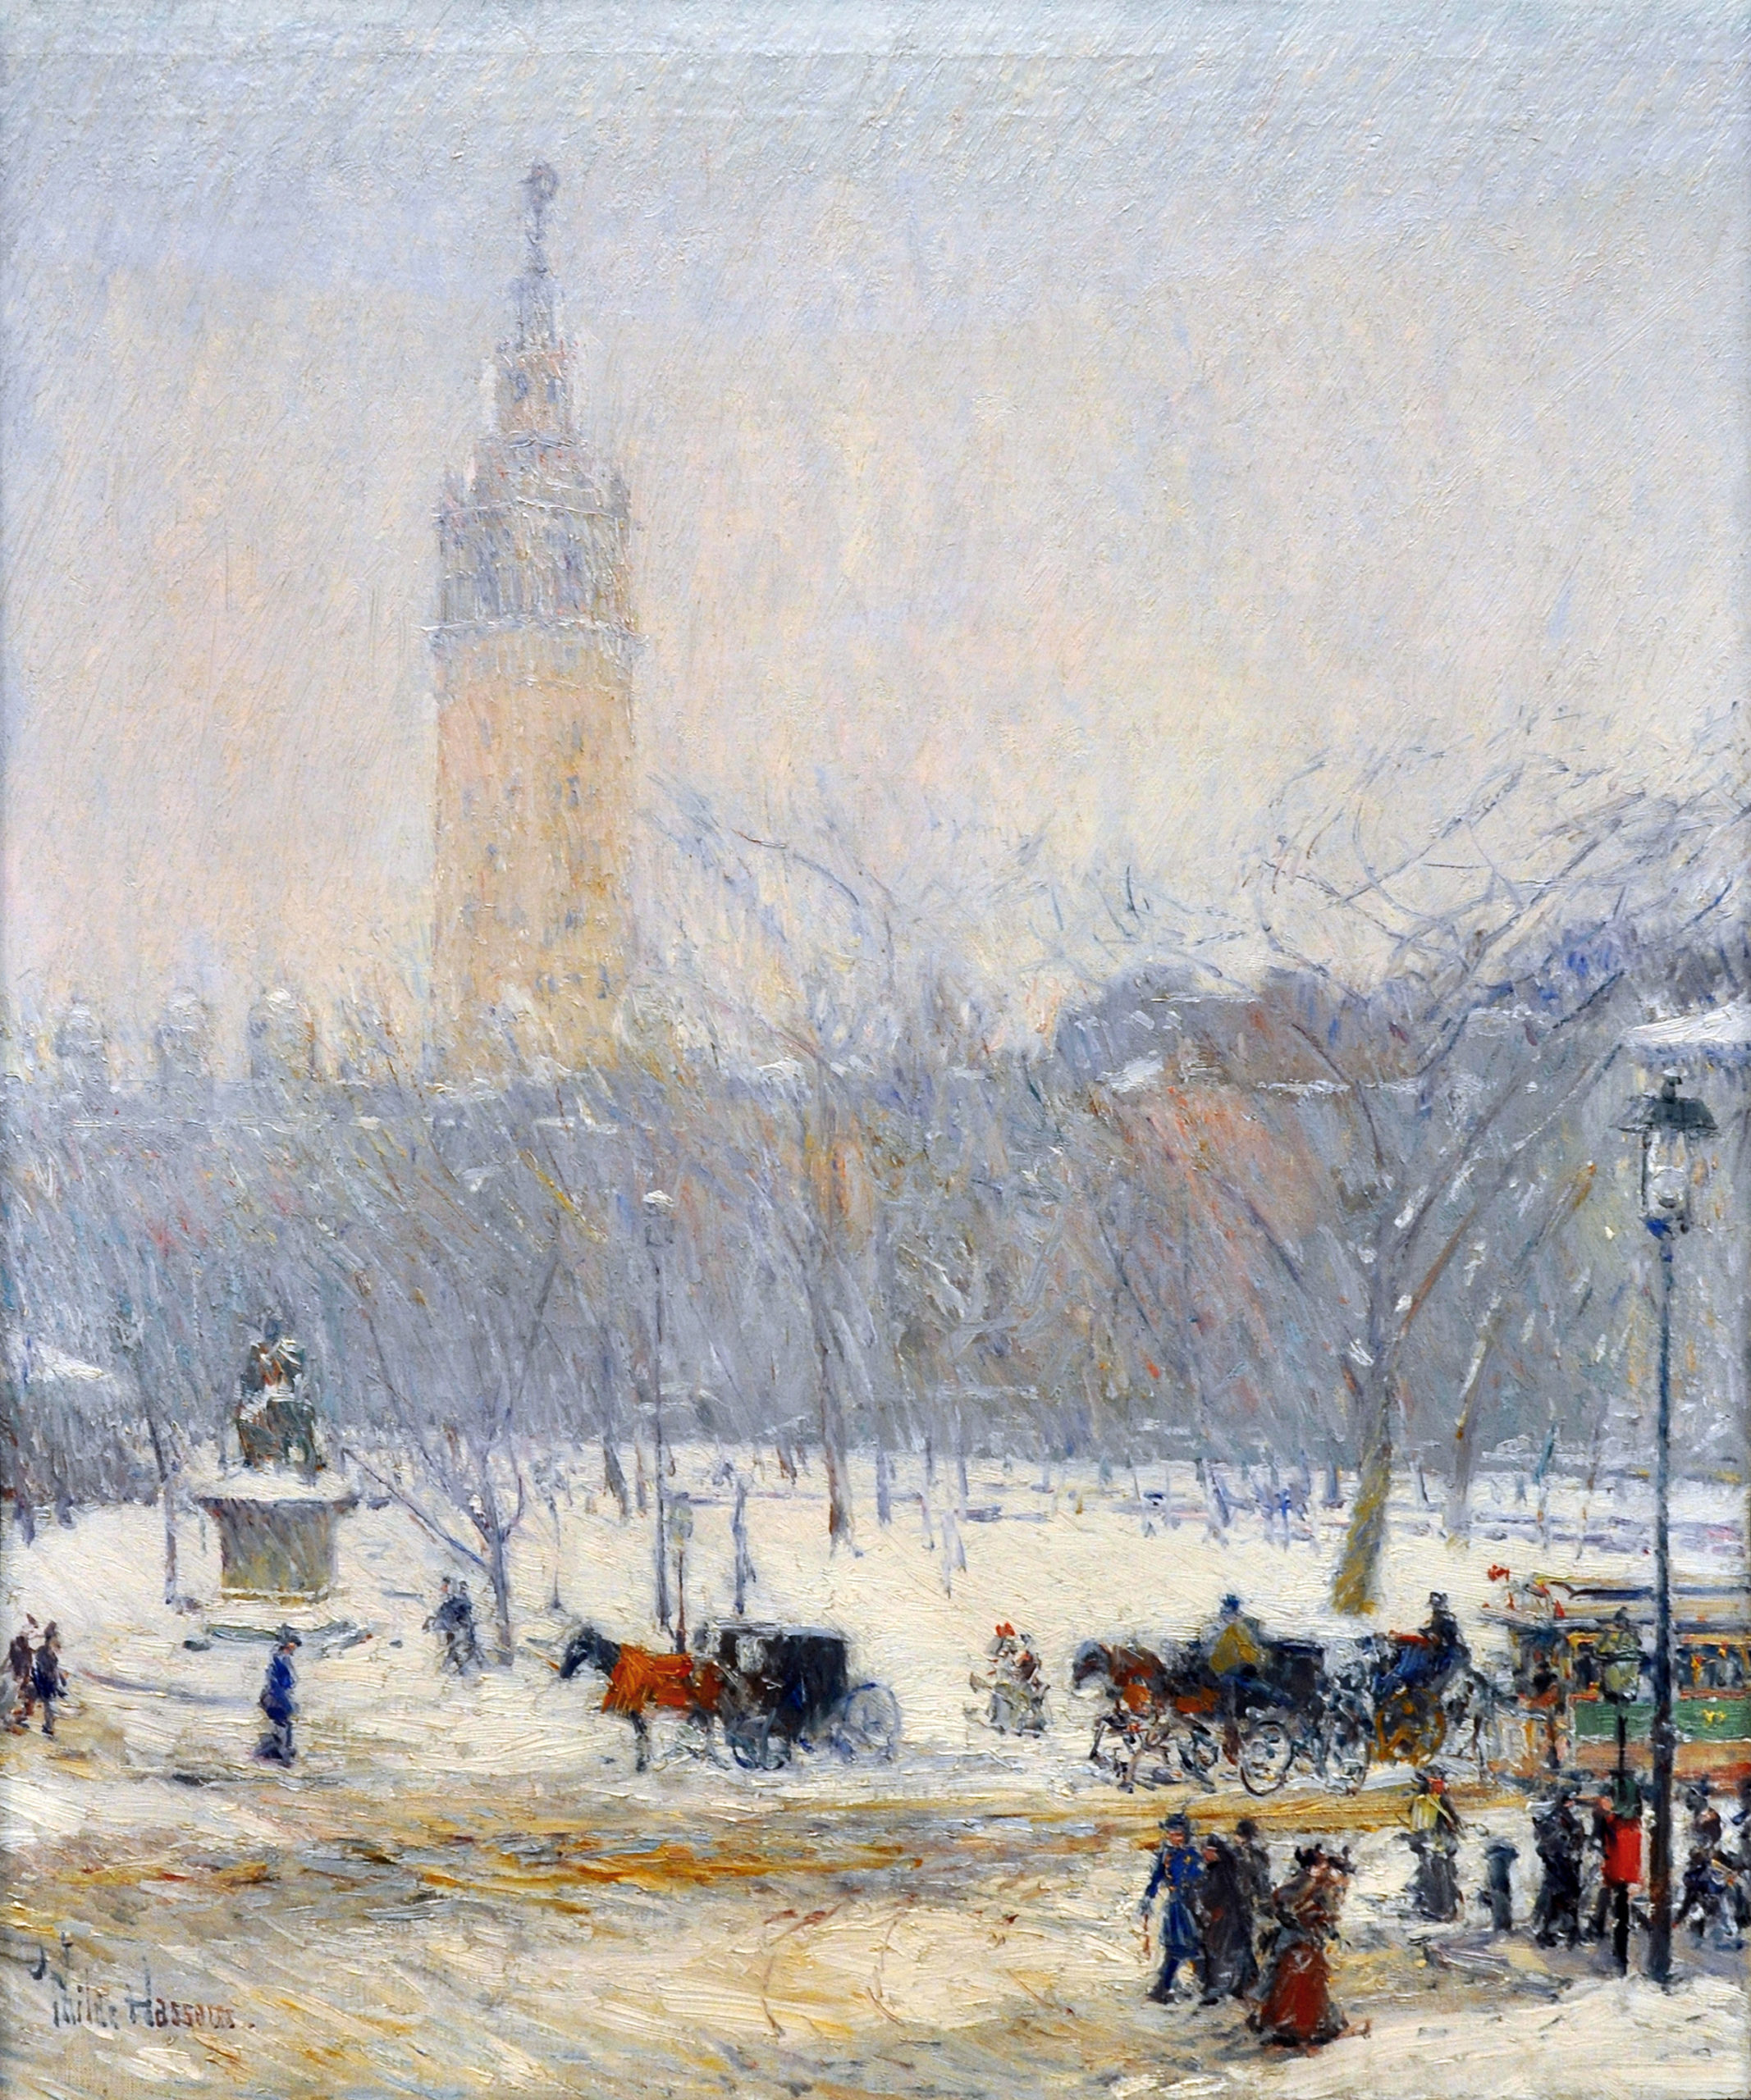 Childe Hassam, Snowstorm, Madison Square, c. 1890, oil on canvas, 20.25 x 16 inches (Baltimore Museum of Art)